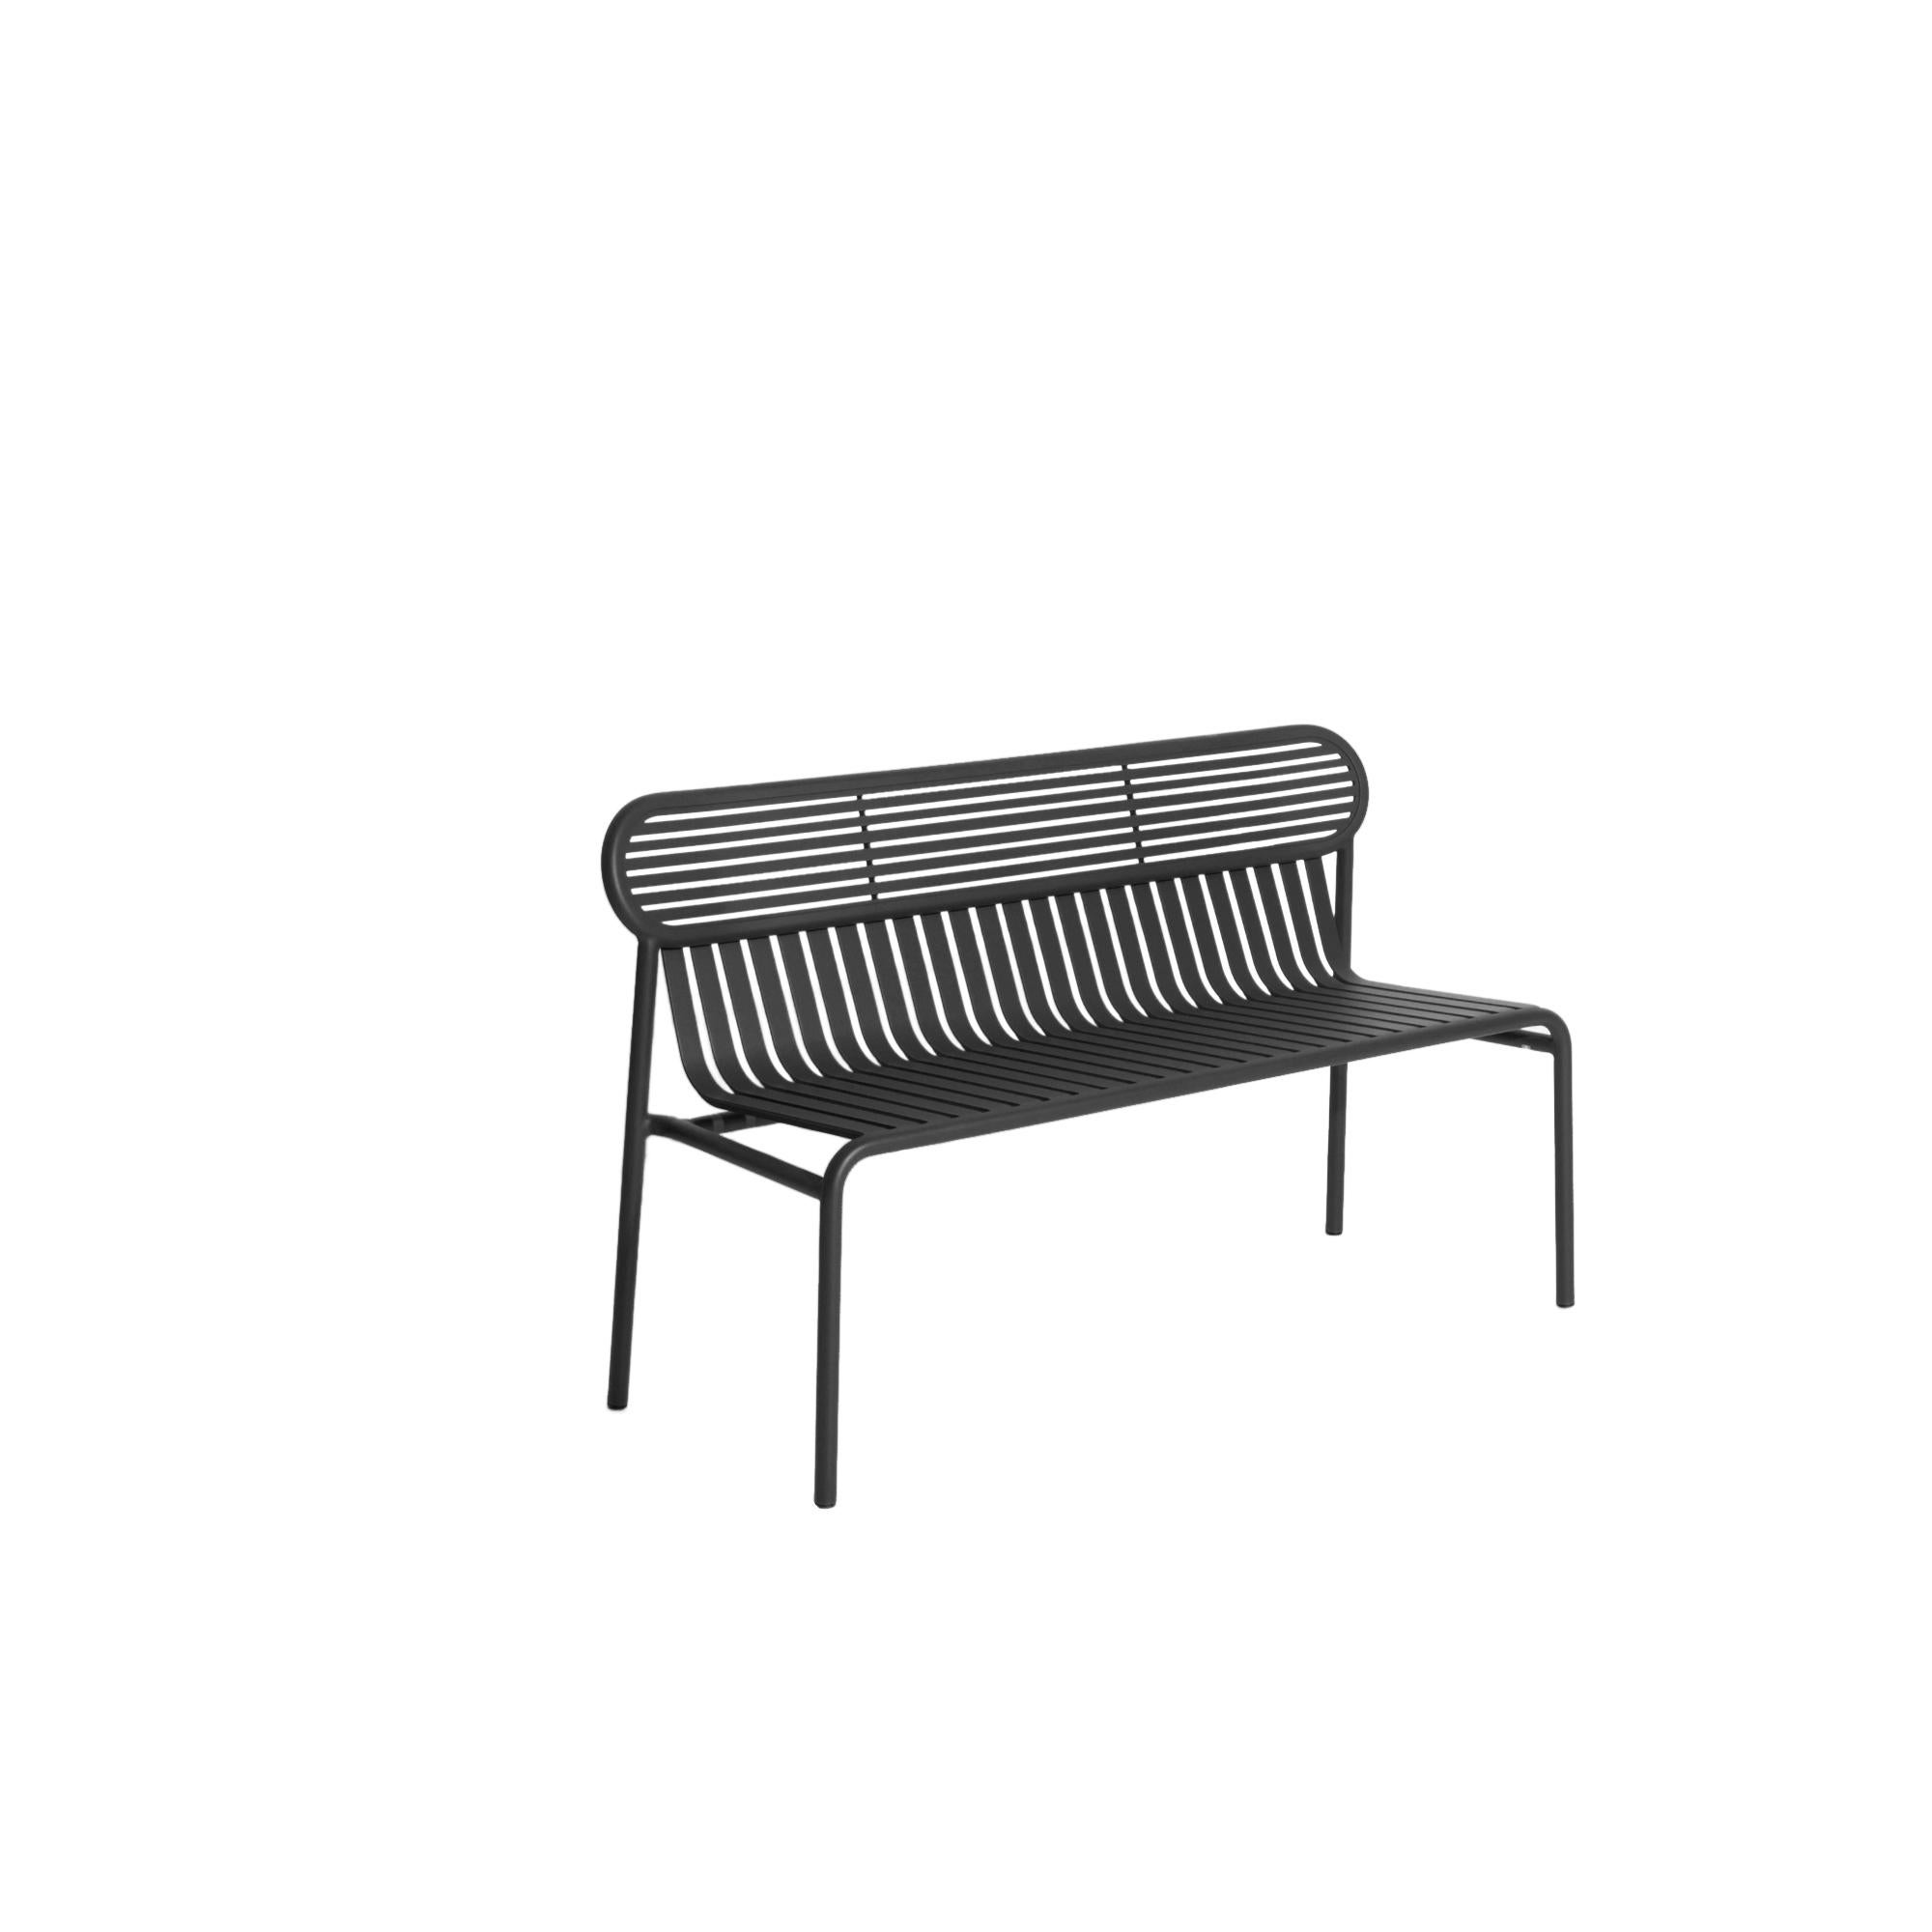 Petite Friture Week-End Bench in Black Aluminium by Studio BrichetZiegler, 2017

The week-end collection is a full range of outdoor furniture, in aluminium grained epoxy paint, matt finish, that includes 18 functions and 8 colours for the retail